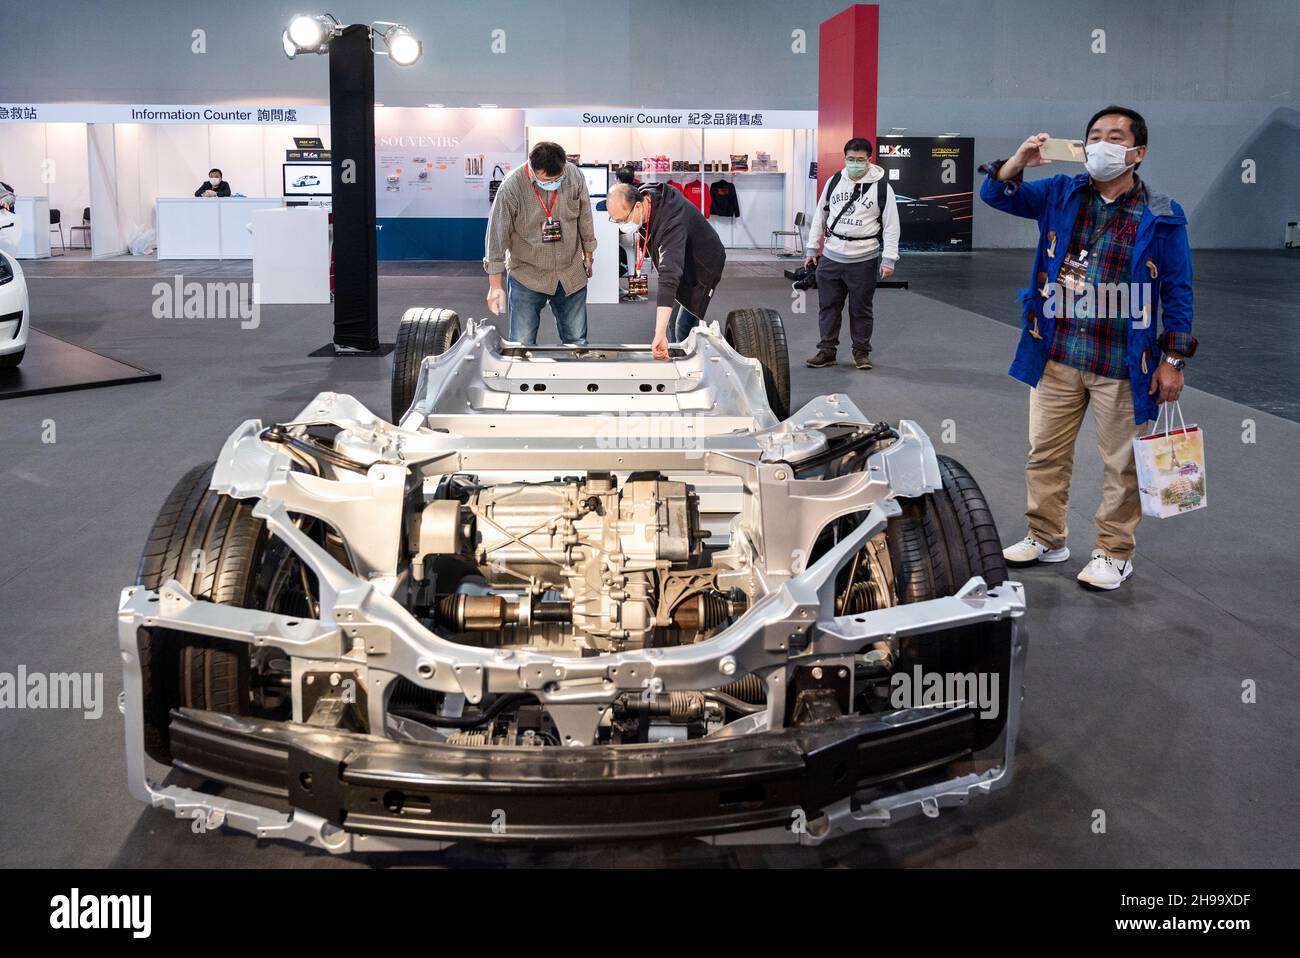 Hong Kong, China. 05th Dec, 2021. Visitors look and take photos of a Tesla chassis car, vehicle frame and the underpart of a motor vehicle, during the International Motor Expo (IMXHK) showcasing thermic and electric cars and motorcycles in Hong Kong. (Photo by Budrul Chukrut/SOPA Images/Sipa USA) Credit: Sipa USA/Alamy Live News Stock Photo